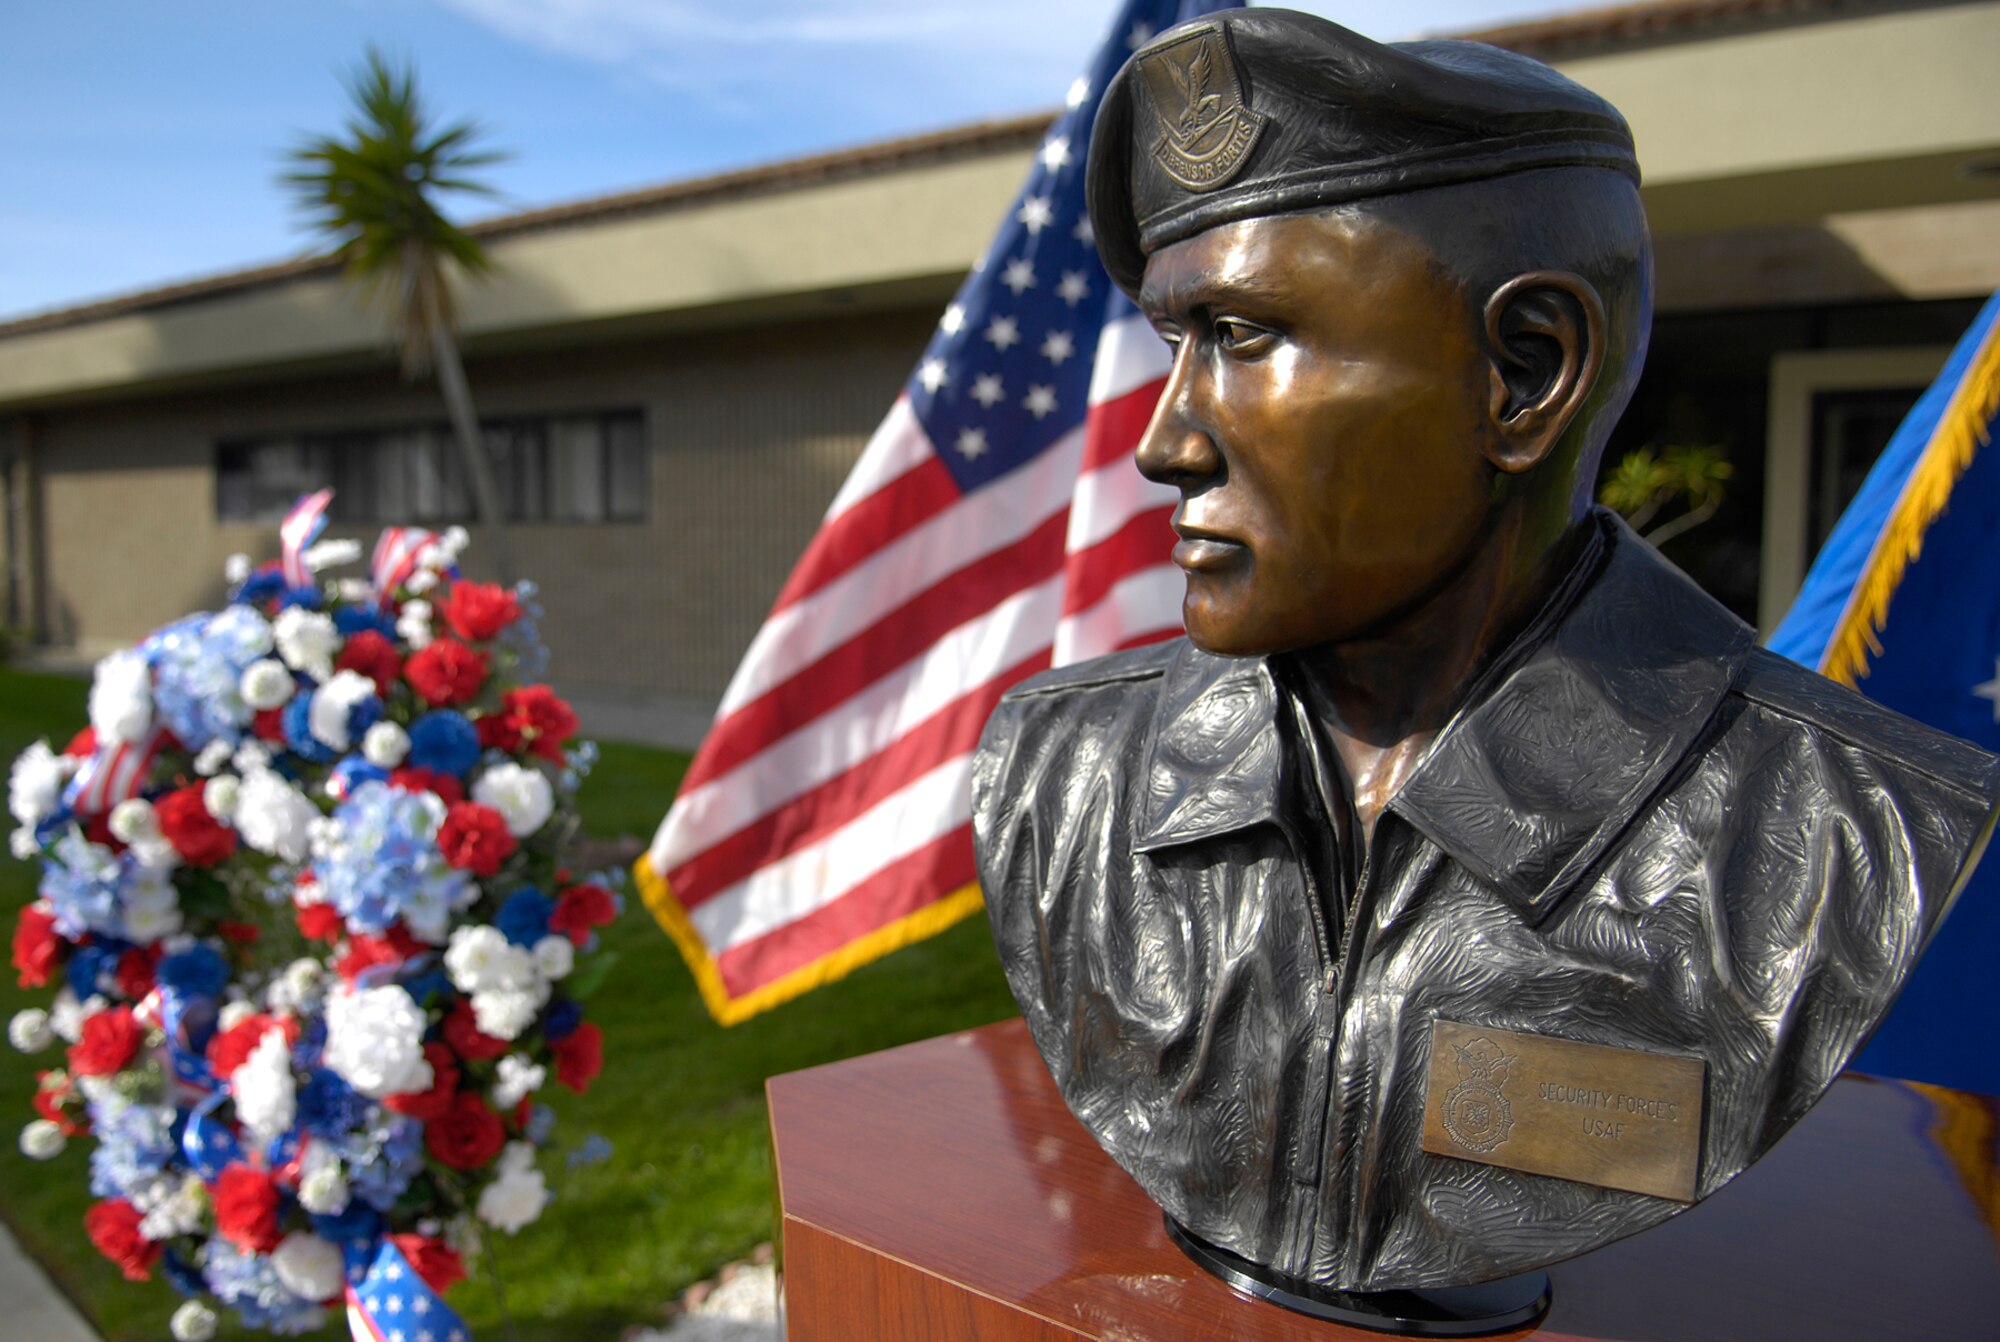 VANDENBERG AIR FORCE BASE, Calif. --  The 30th Security Forces Squadron's memorial ceremony was in memory of two Airmen, 1st Lt. Joseph D. Helton and Airman 1st Class Jason D. Nathan, who made the ultimate sacrifice during their duties while deployed in support of Operation Iraqi Freedom. (U.S. Air Force photo/Airman 1st Class Andrew Lee) 
 
 